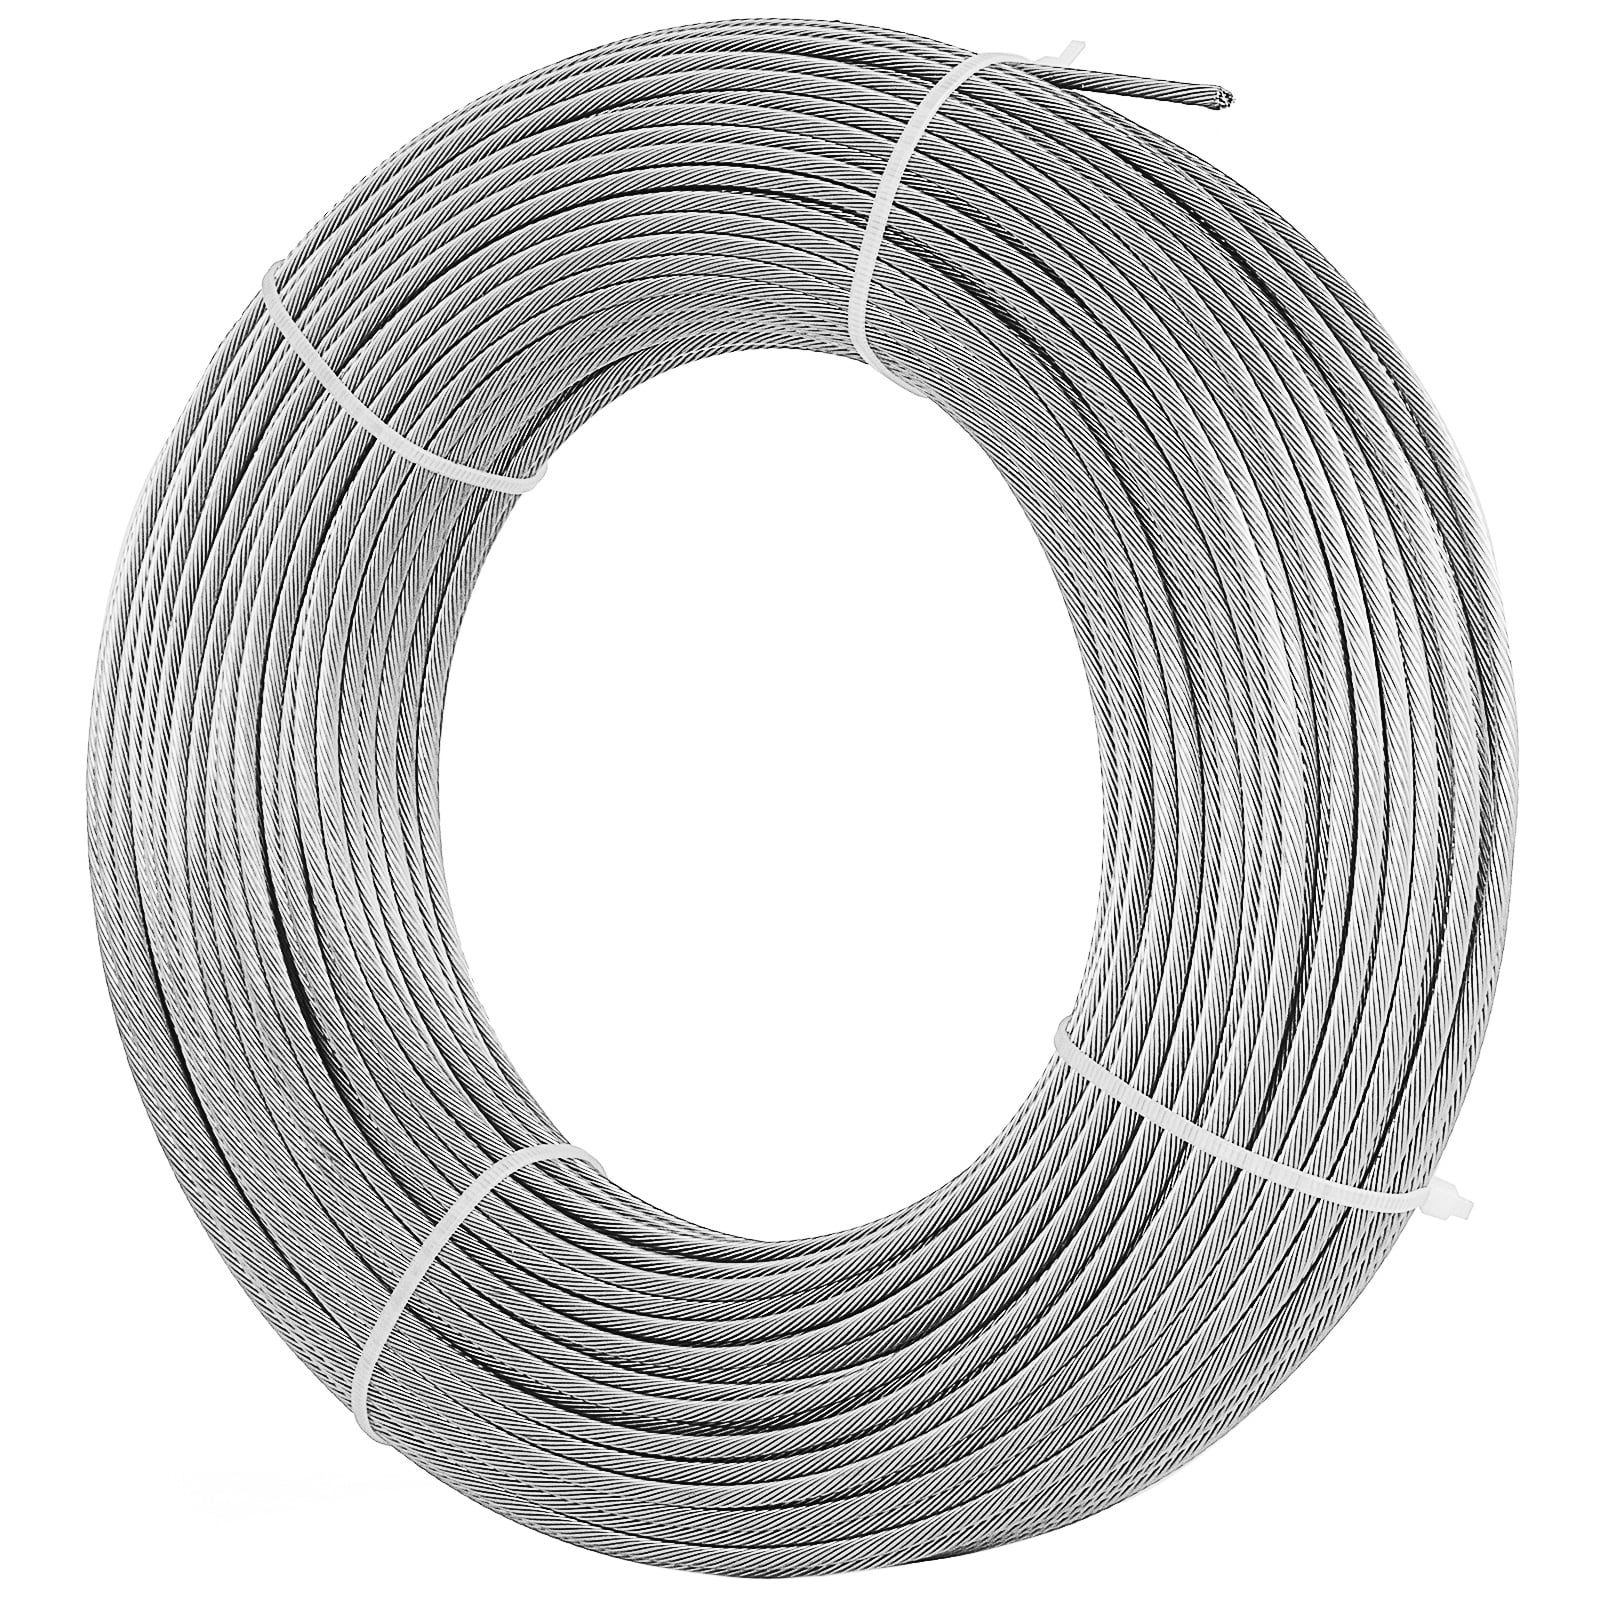 1x19 200 ft Cable Railing T316 Stainless Steel Wire Rope Cable Strand 1/8" 